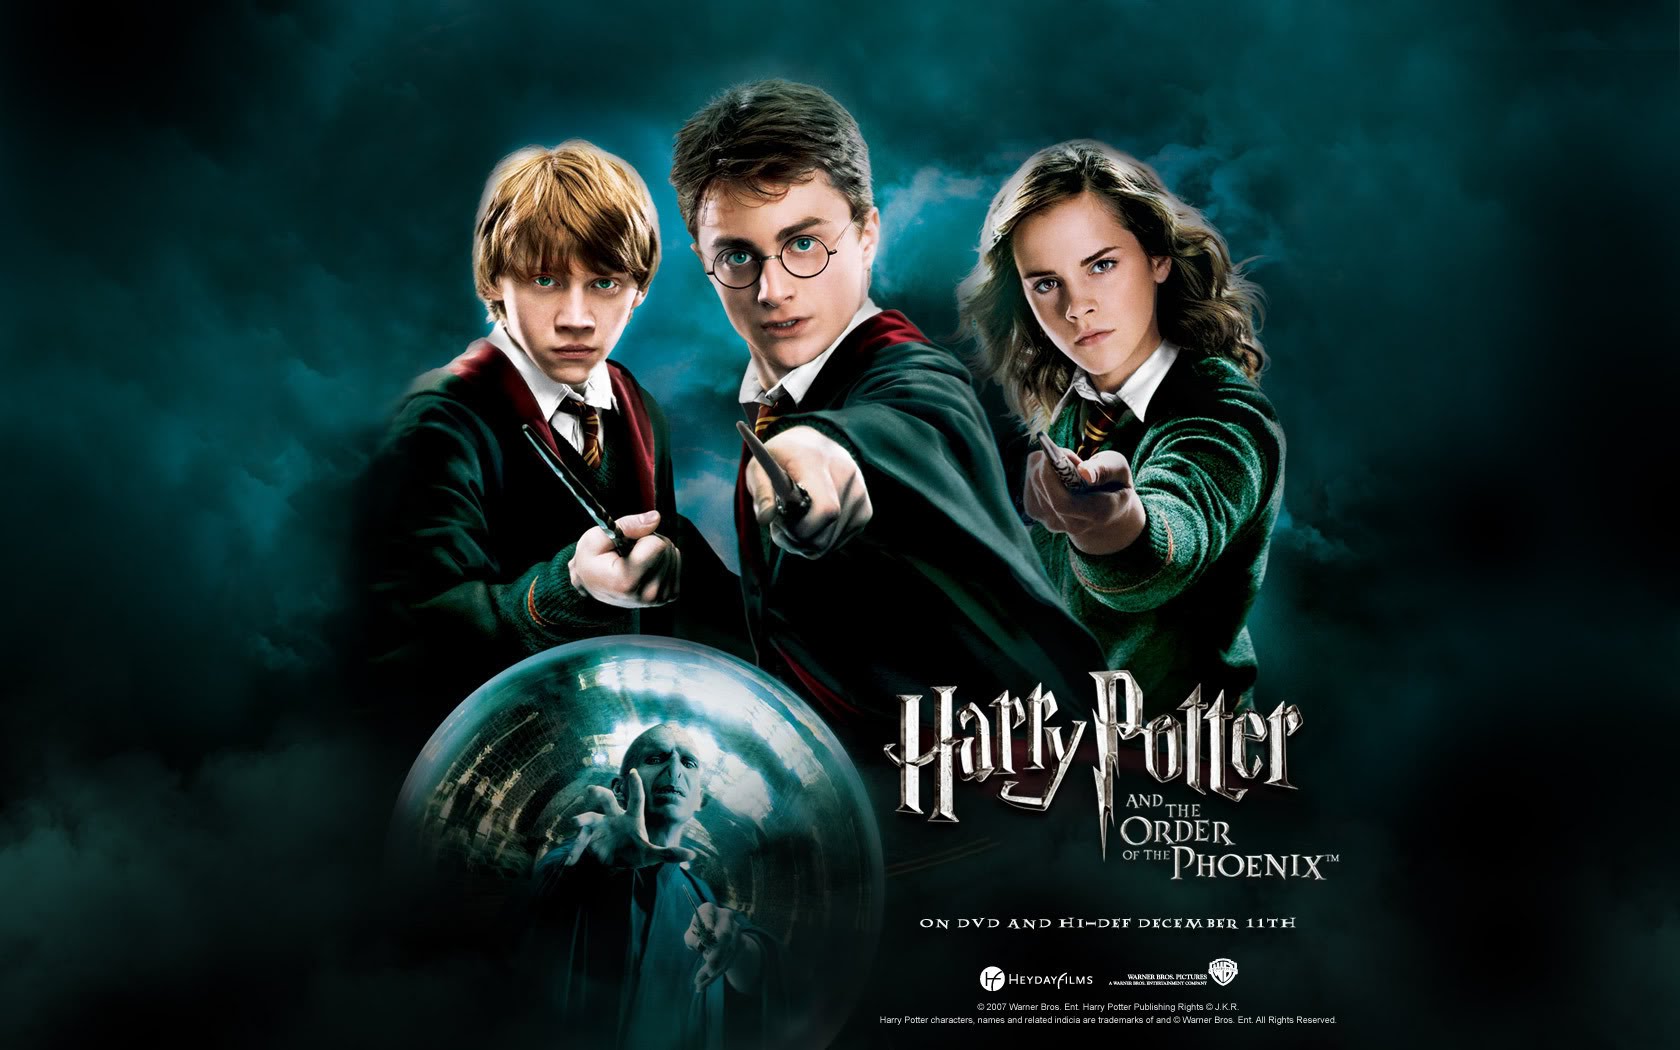 harry potter and order of the phoenix 123movies full movie